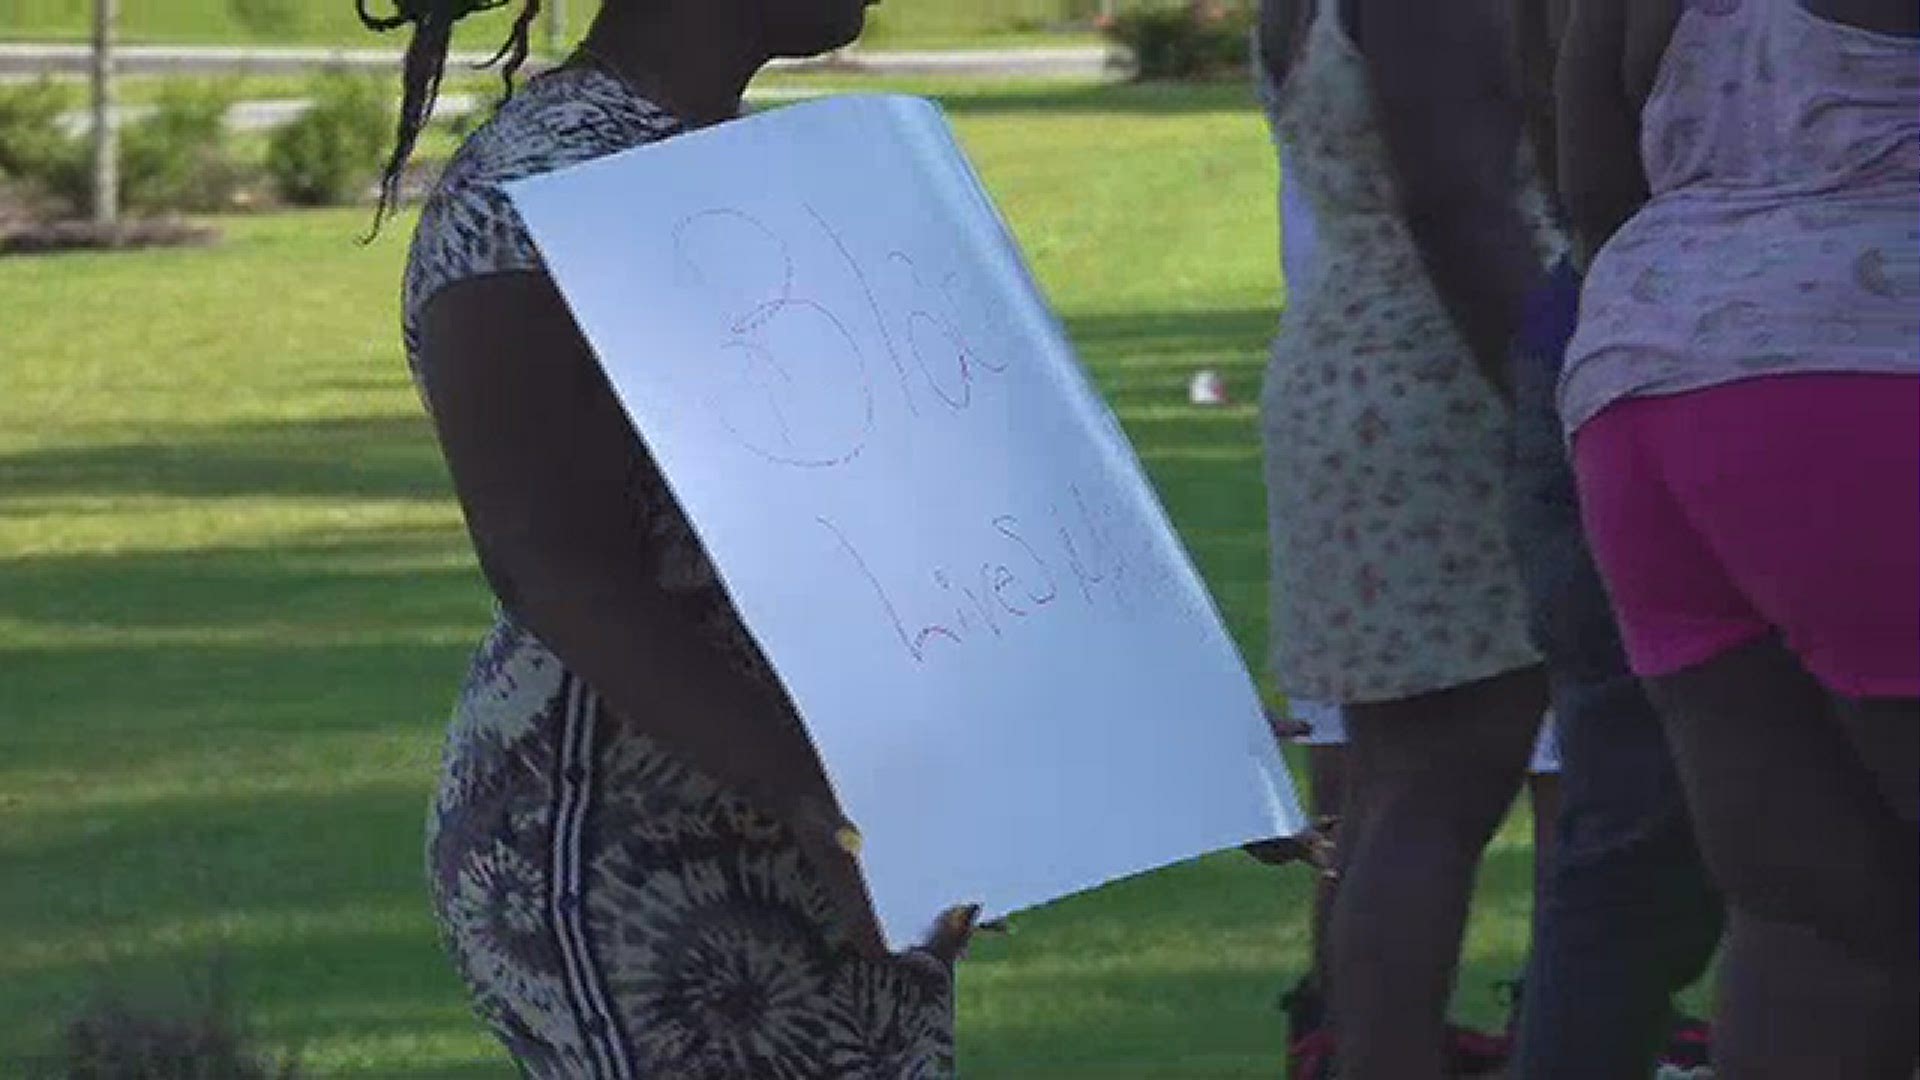 A small group of protesters gathered in Sumter Saturday to protest the death of George Floyd.